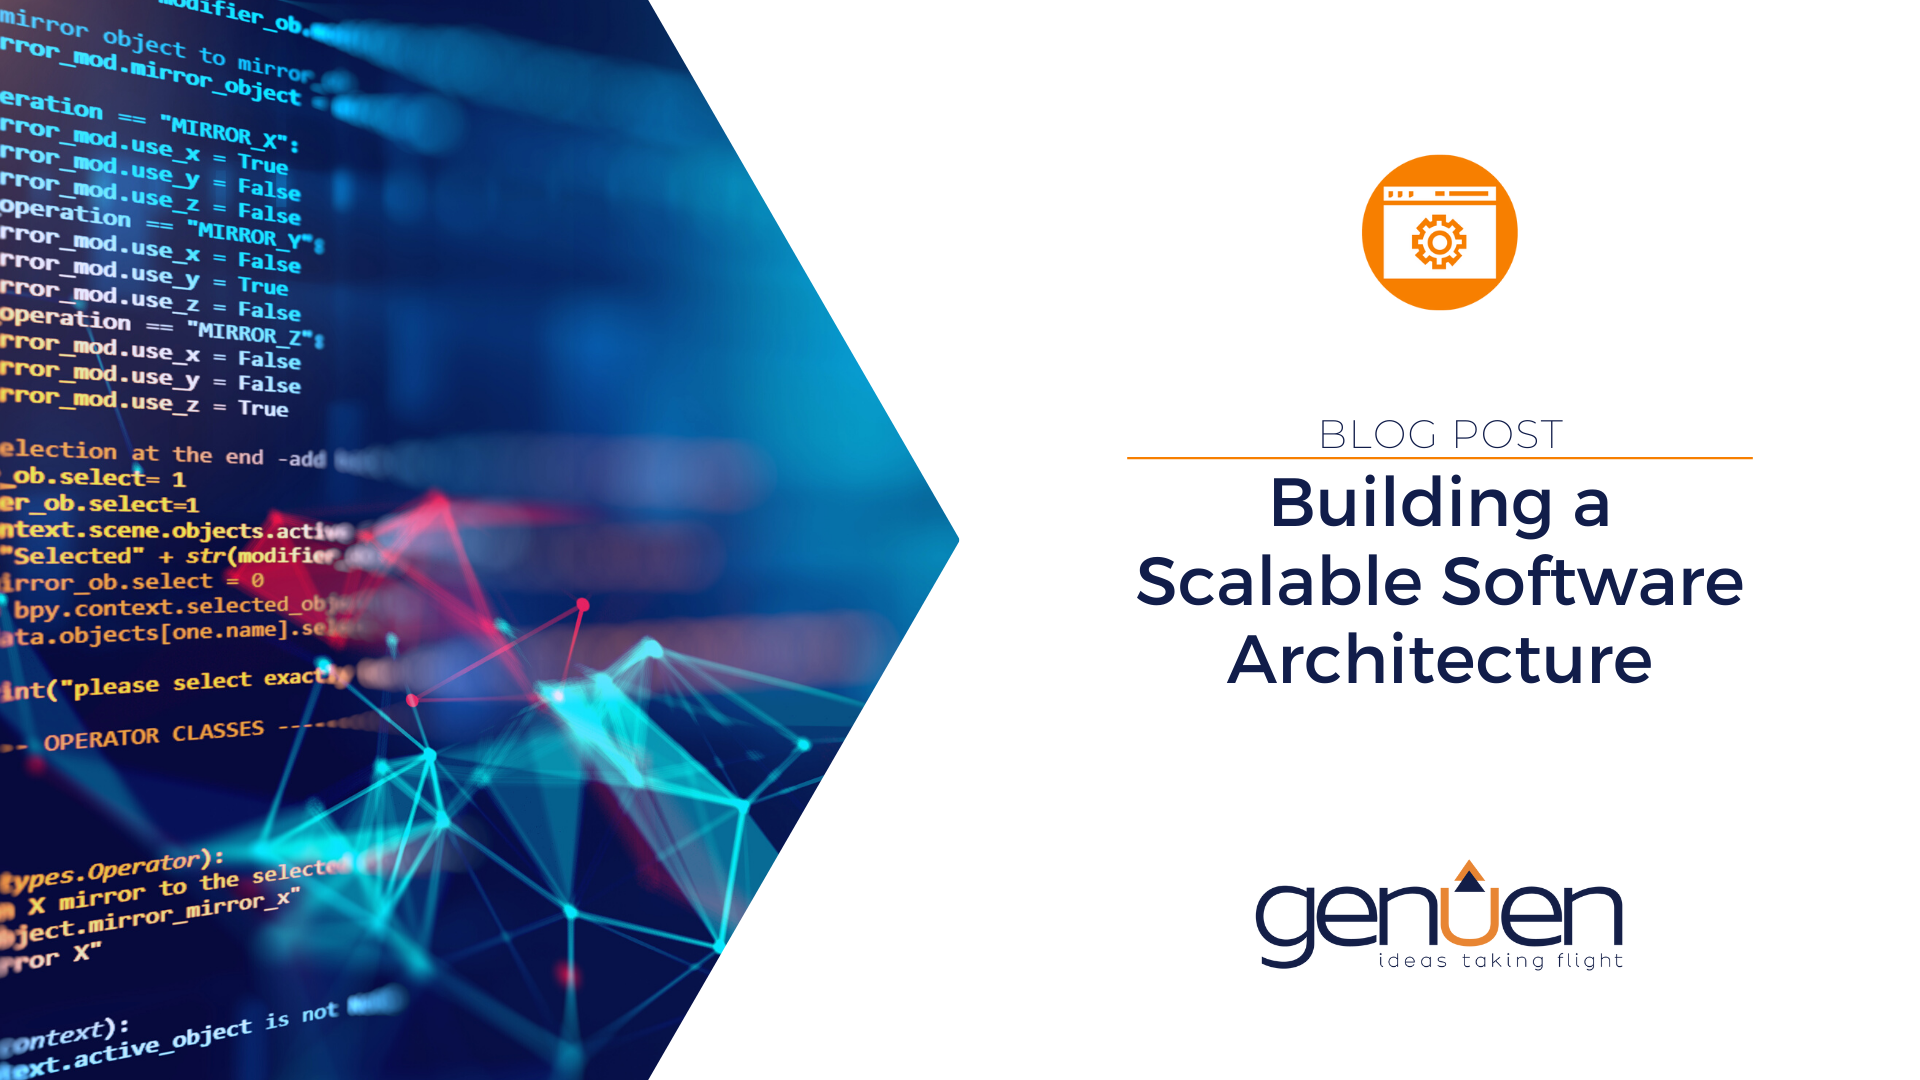 Building a Scalable Software Architecture